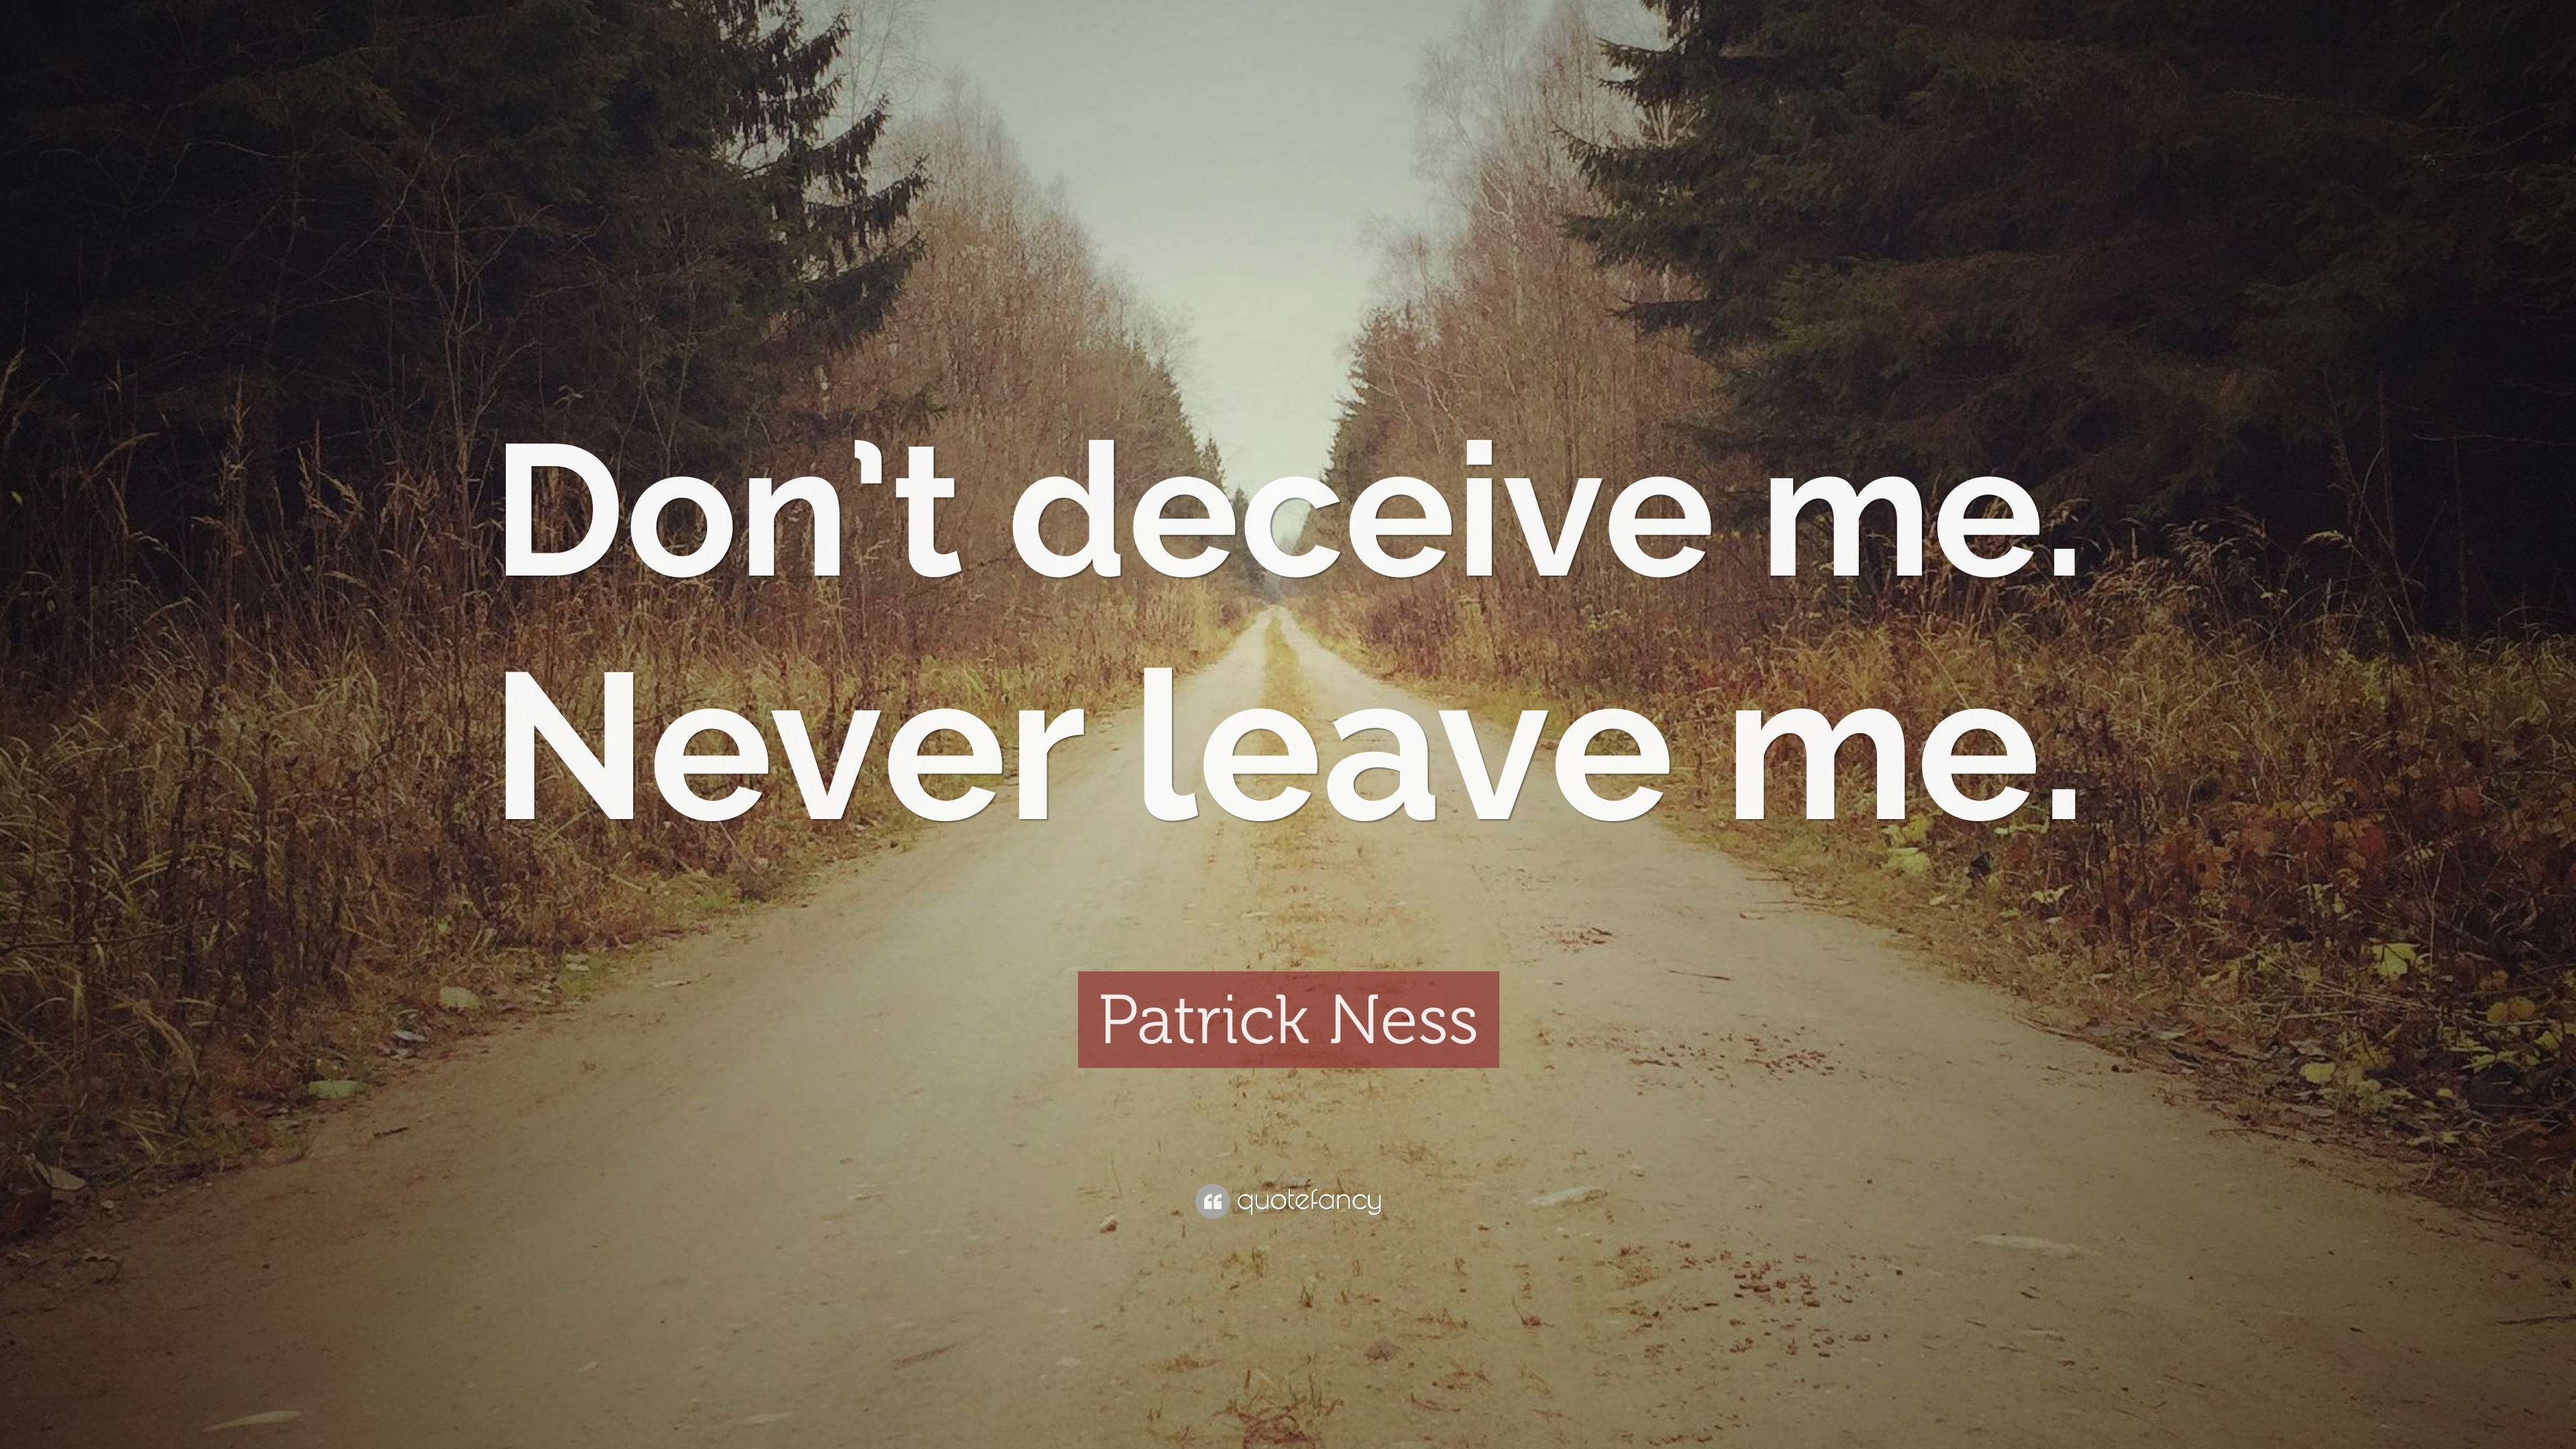 Patrick Ness Quote “Don’t deceive me. Never leave me.” (12 wallpapers